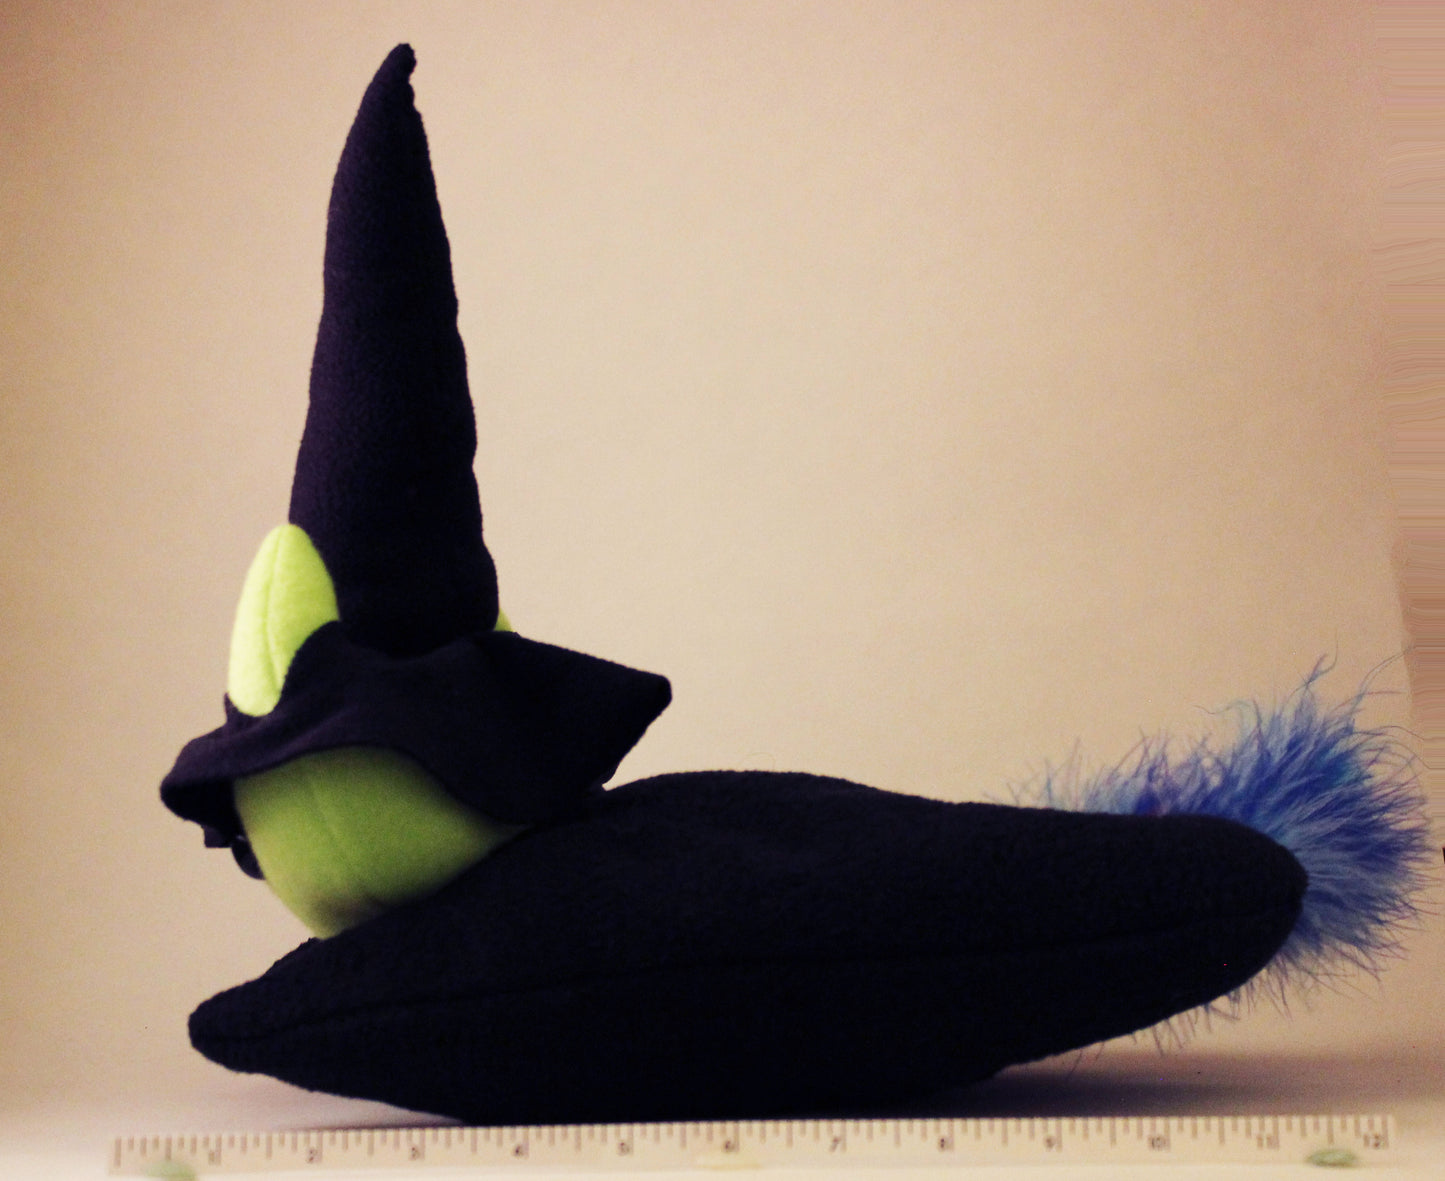 Witch Cat, Plushies - Team Manticore